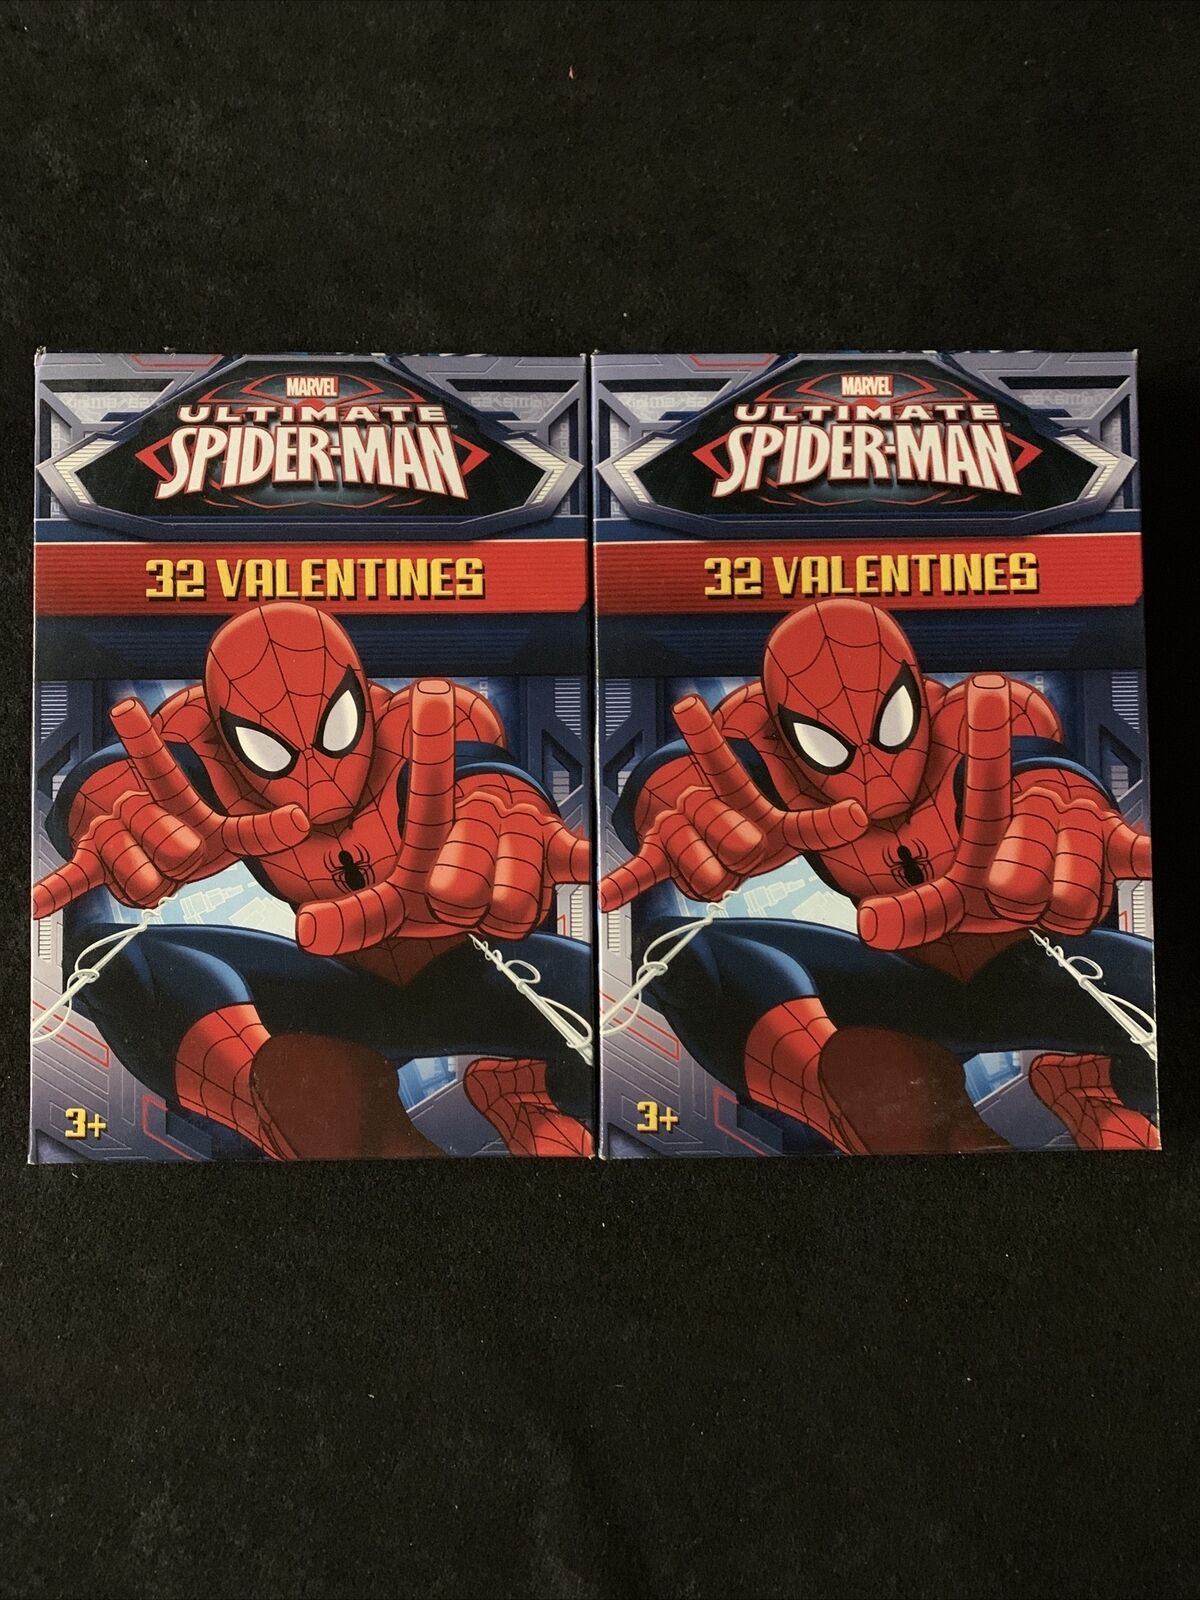 LOT OF 2 BOXES- Valentines Day Cards 32 Marvel Ultimate Spider-Man. Spiderman